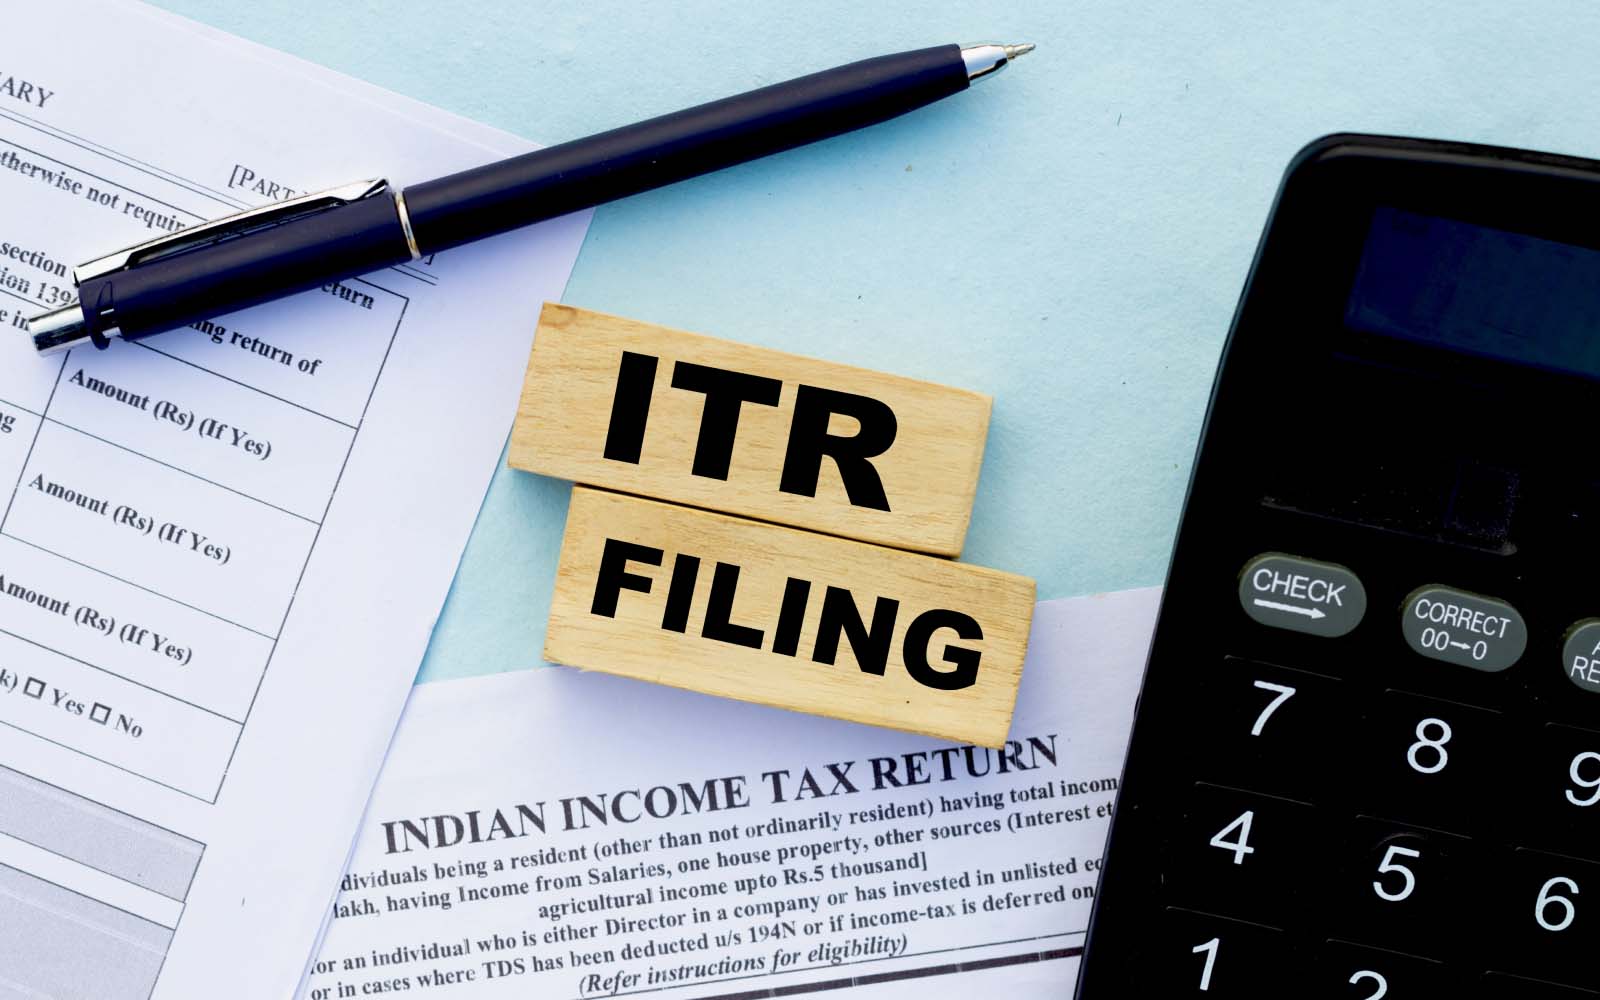 ITR Filing: Income tax slab rates and deductions for old and new tax regimes